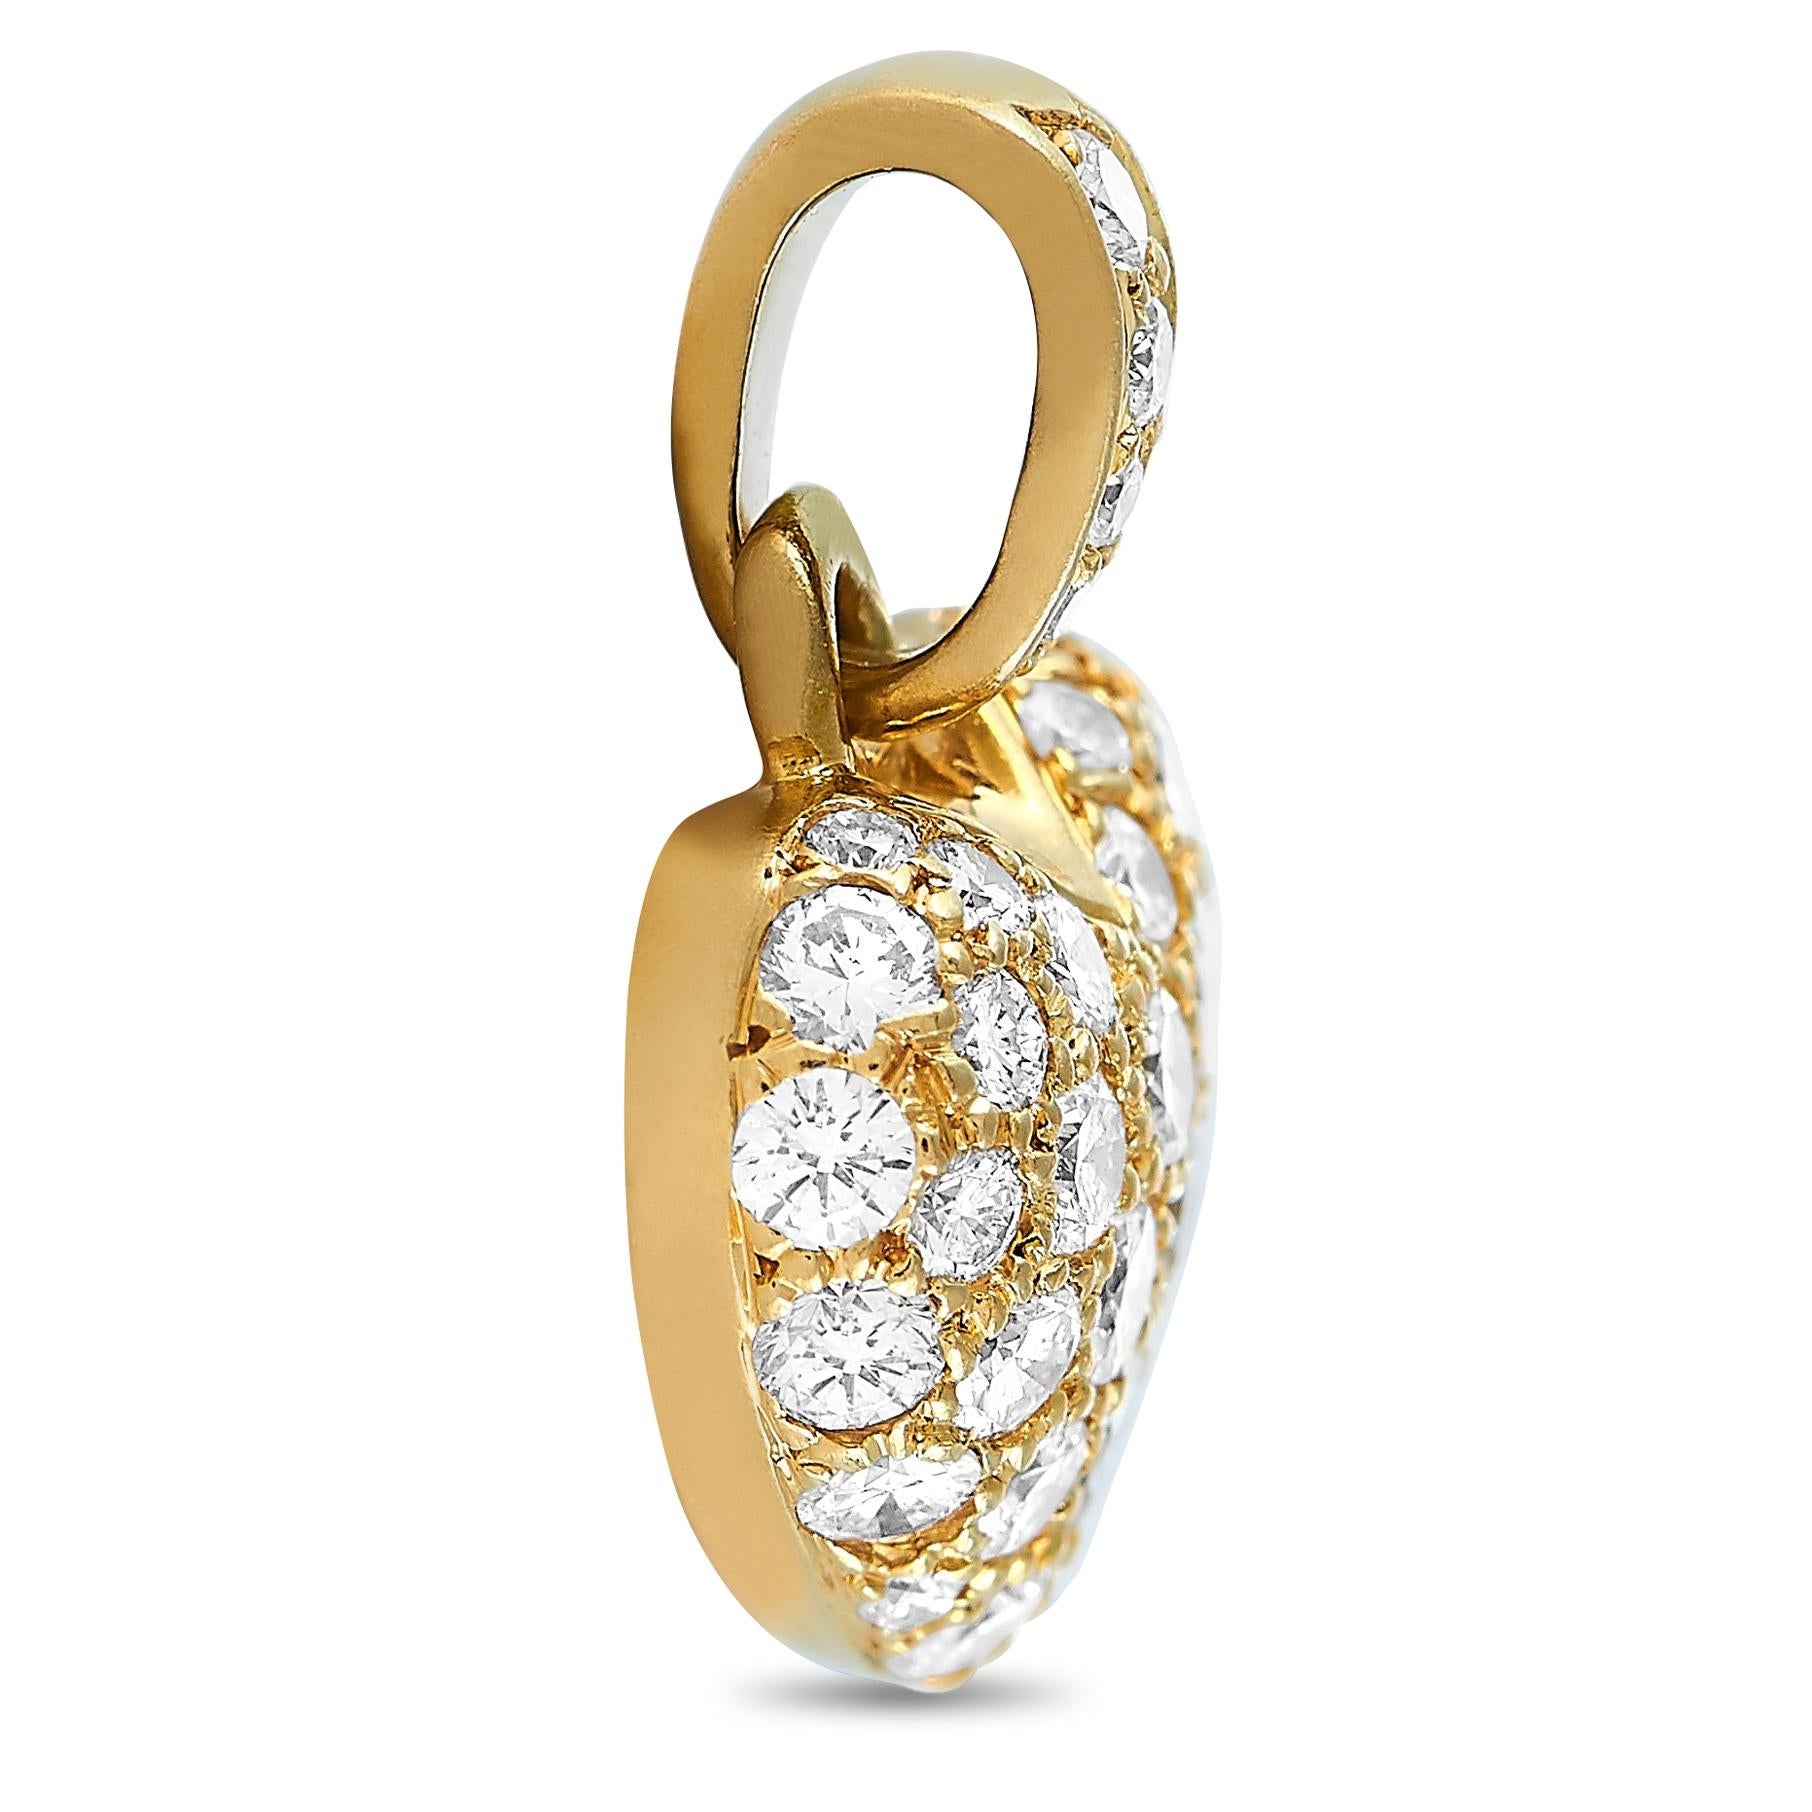 This Cartier heart pendant is crafted from 18K yellow gold and set with diamonds that total 0.65 carats. The pendant weighs 1.5 grams and measures 0.62” in length and 0.45” in width.
 
 Offered in estate condition, this item includes the